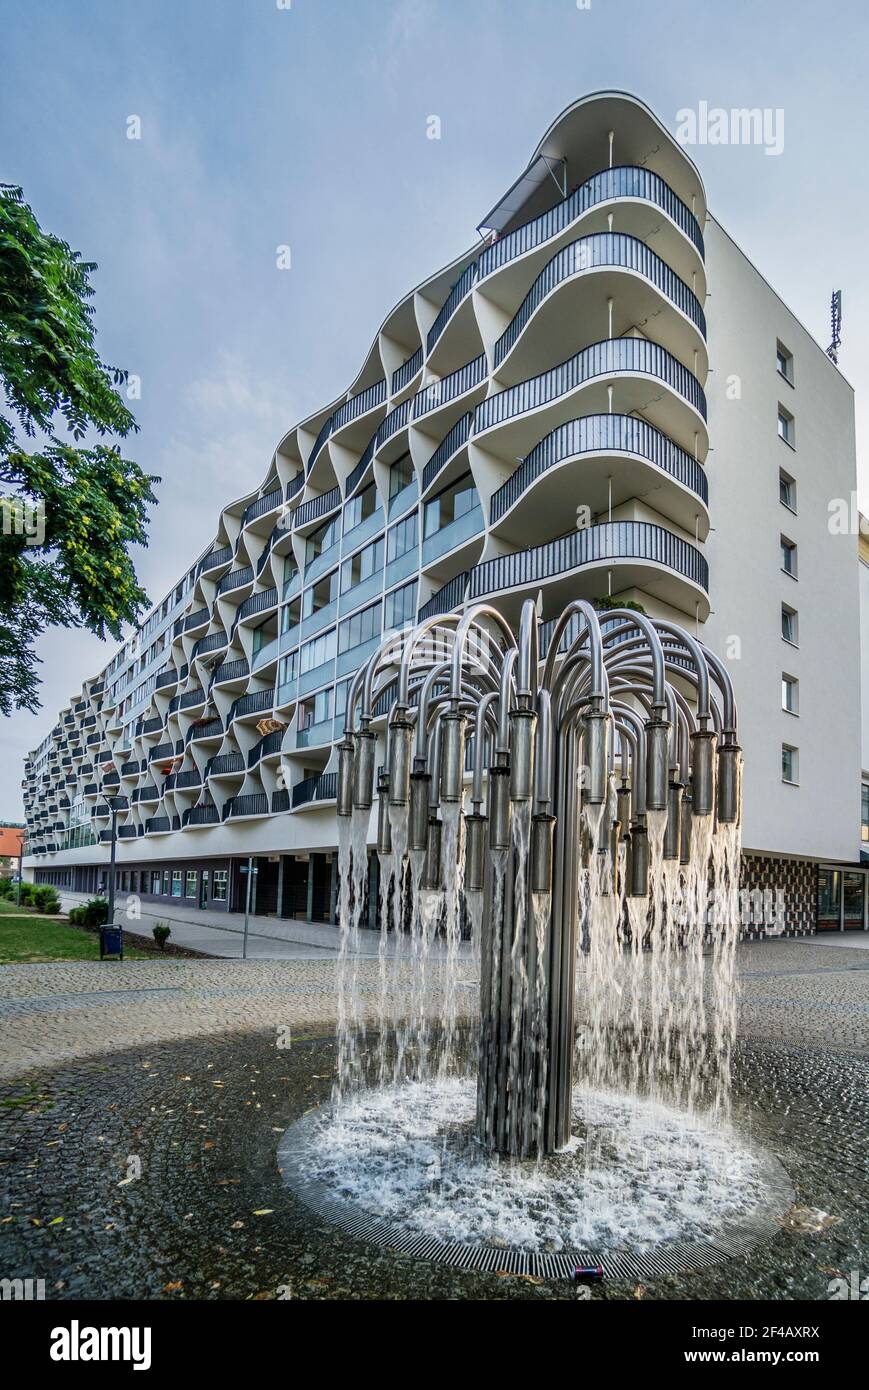 fountain at the wave facade of a redeveloped former GDR prefabricated municipal housing building, Magdeburg, Saxony-Anhalt, Germany Stock Photo